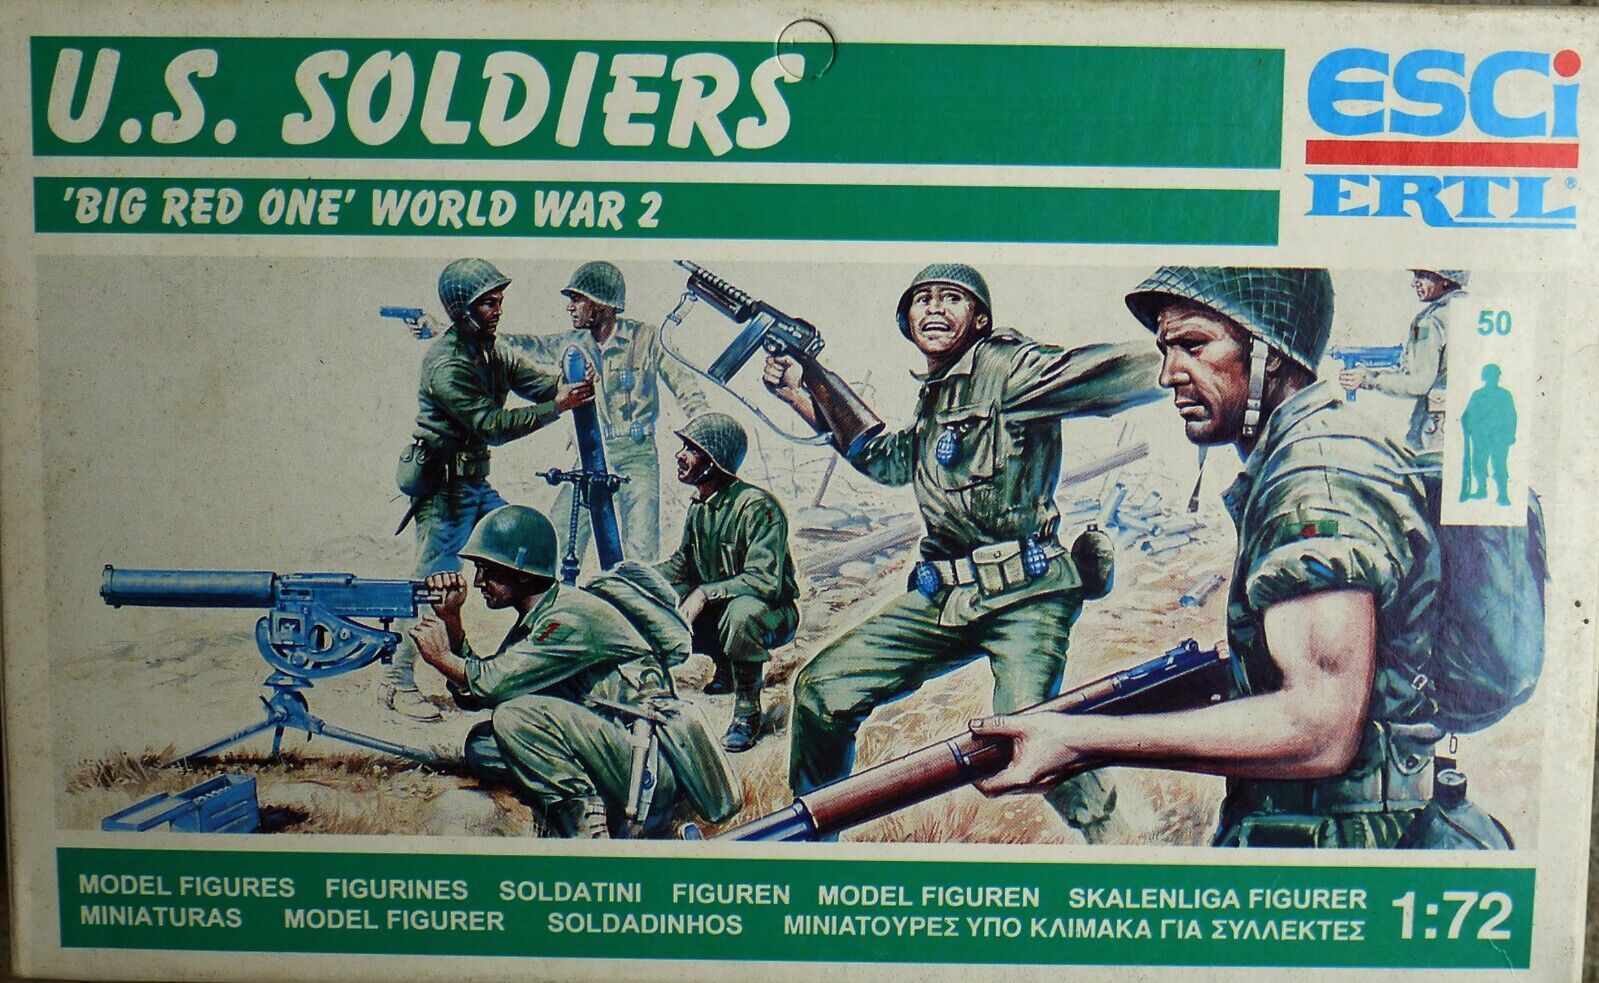 US soldiers big red one ww2 1/72 ESCI p-202